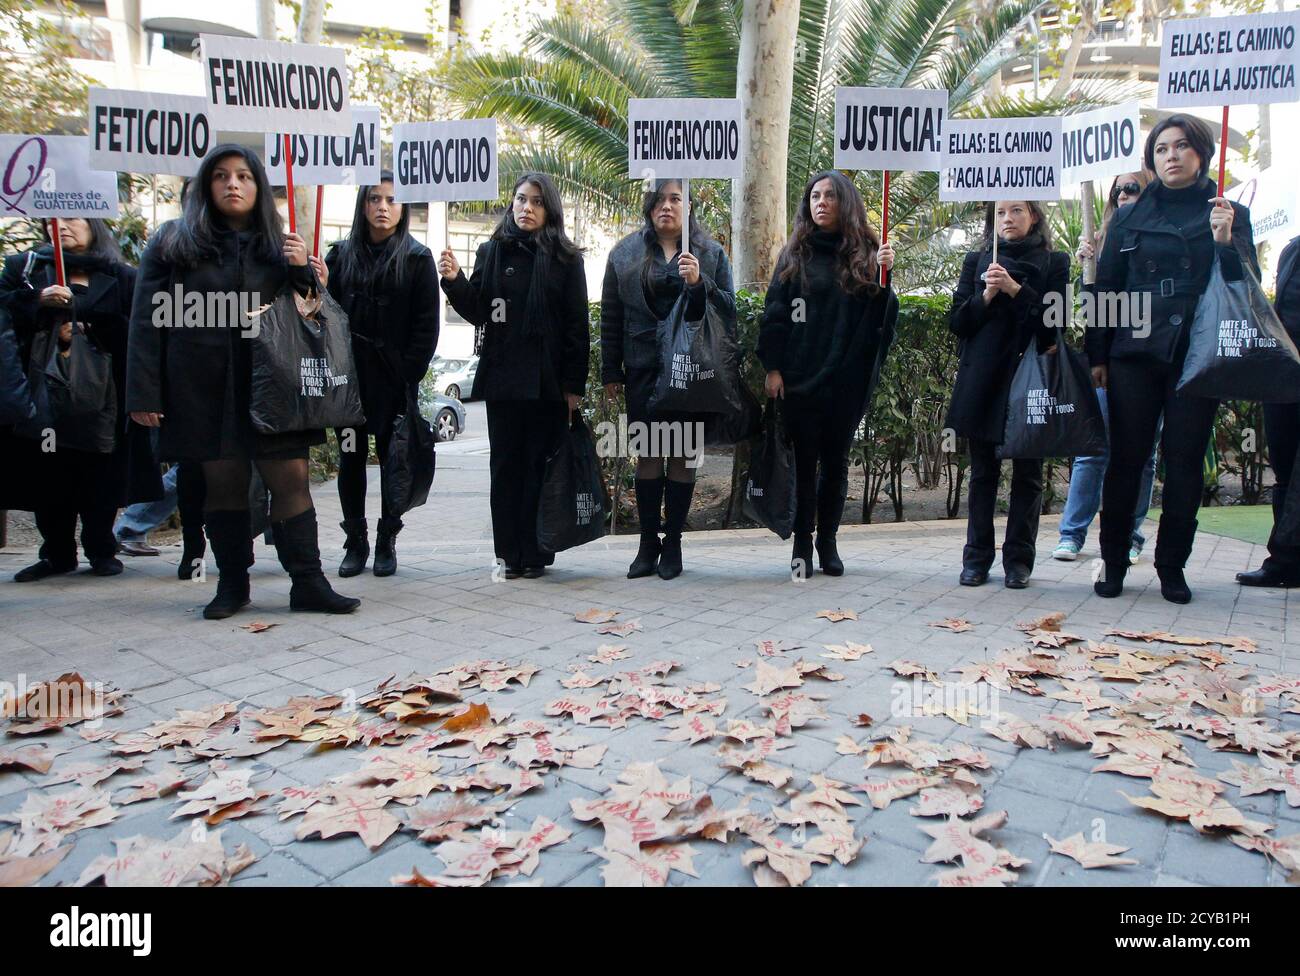 Women from Guatemala carry banners as they protest during the International Day for the Elimination of Violence against Women in front of the Guatemalan embassy in Madrid November 25, 2011. The protest is held to denounce the crimes committed against women during the internal armed conflict in Guatemala. Banners read 'Feticide', 'Femicide' and 'Justice'. REUTERS/Andrea Comas (SPAIN - Tags: CIVIL UNREST POLITICS) Stock Photo